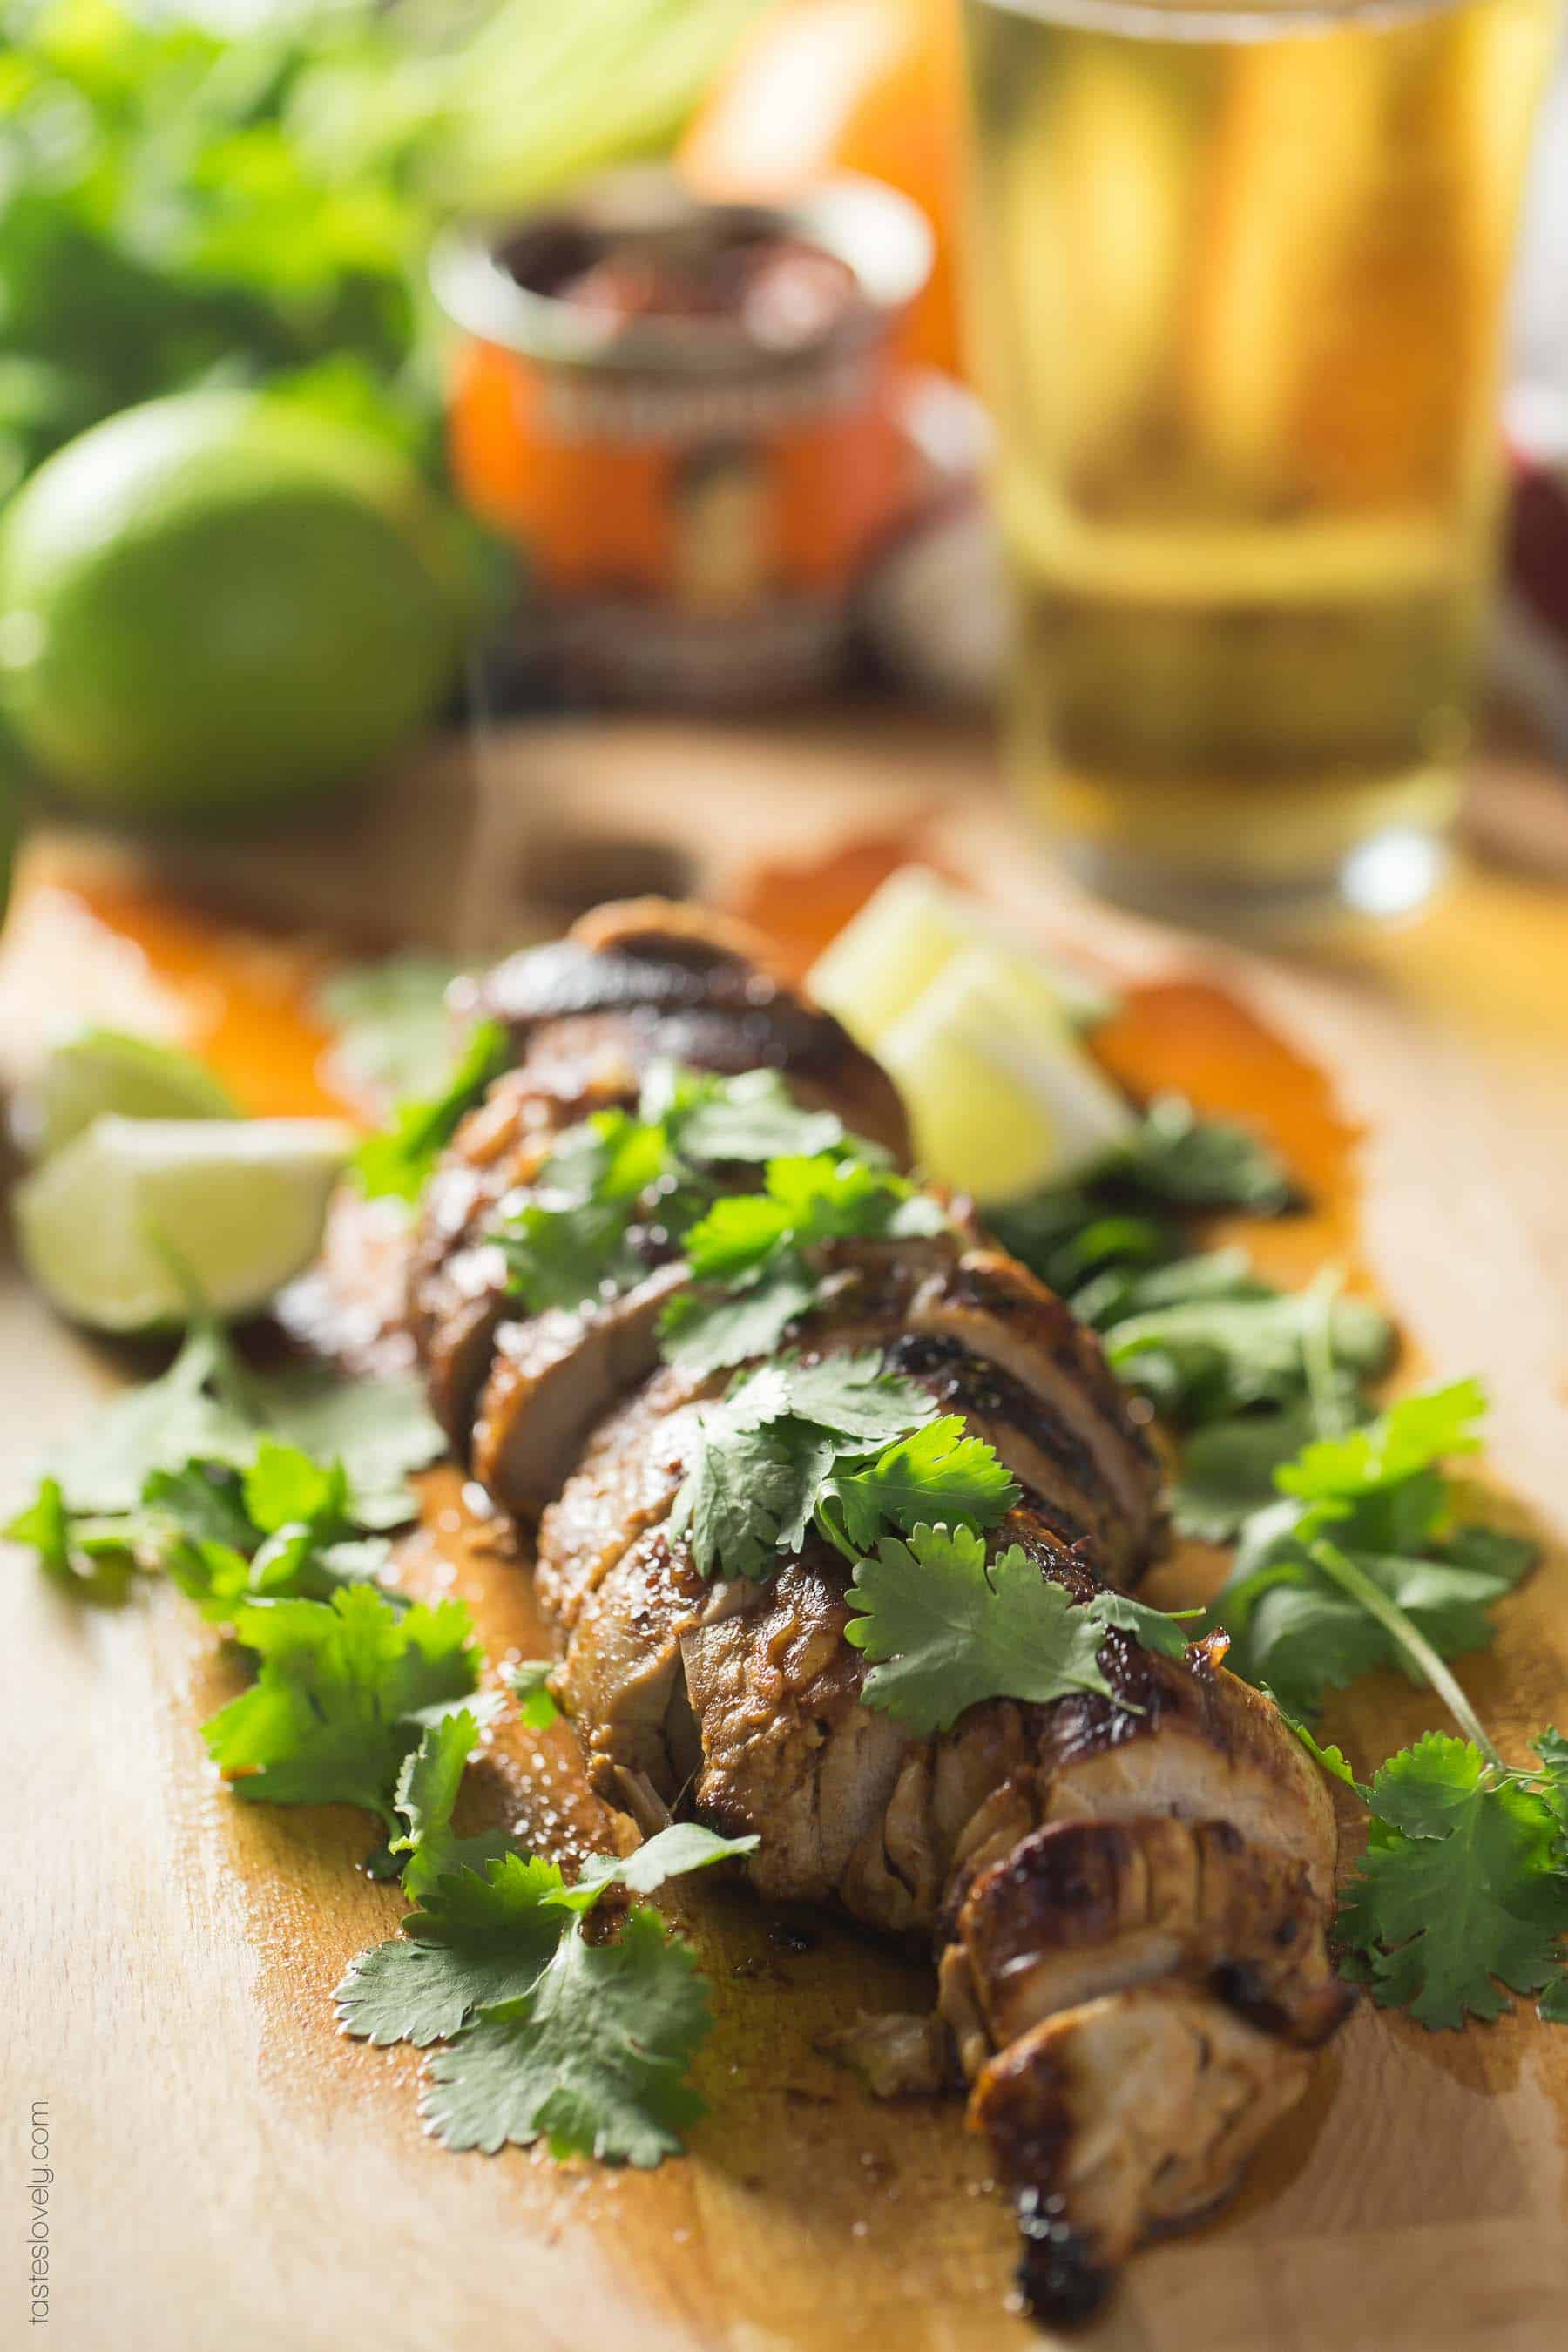 Paleo Chipotle Honey Lime Pork Tenderloin - quick marinade brings TONS of Mexican flavor to this 30 minute dinner recipe (paleo, gluten free, low carb)